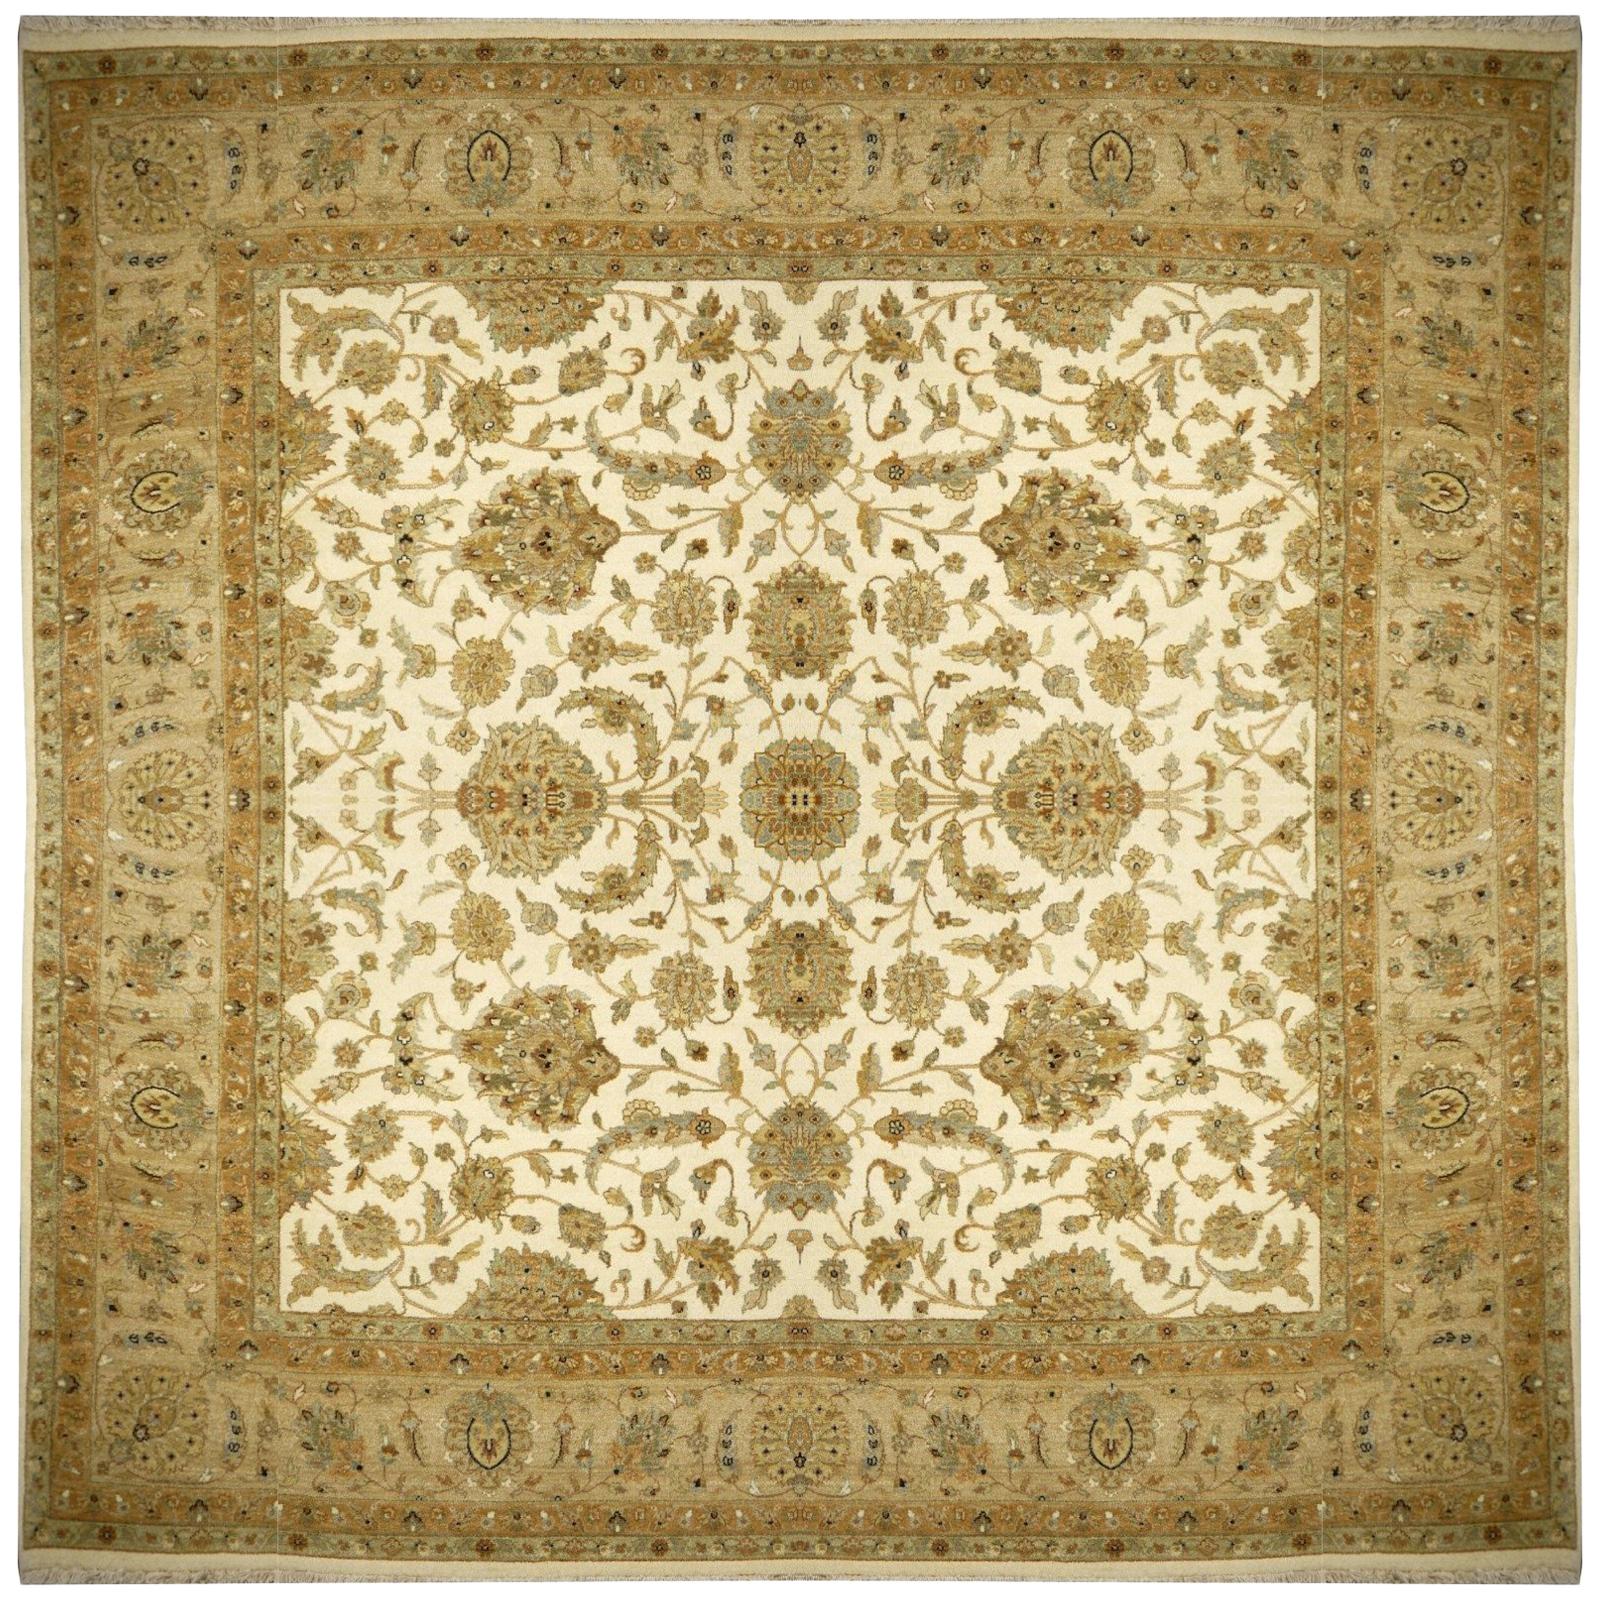 Square Ziegler Mahal Design Rug Wool Pile Beige Green from India